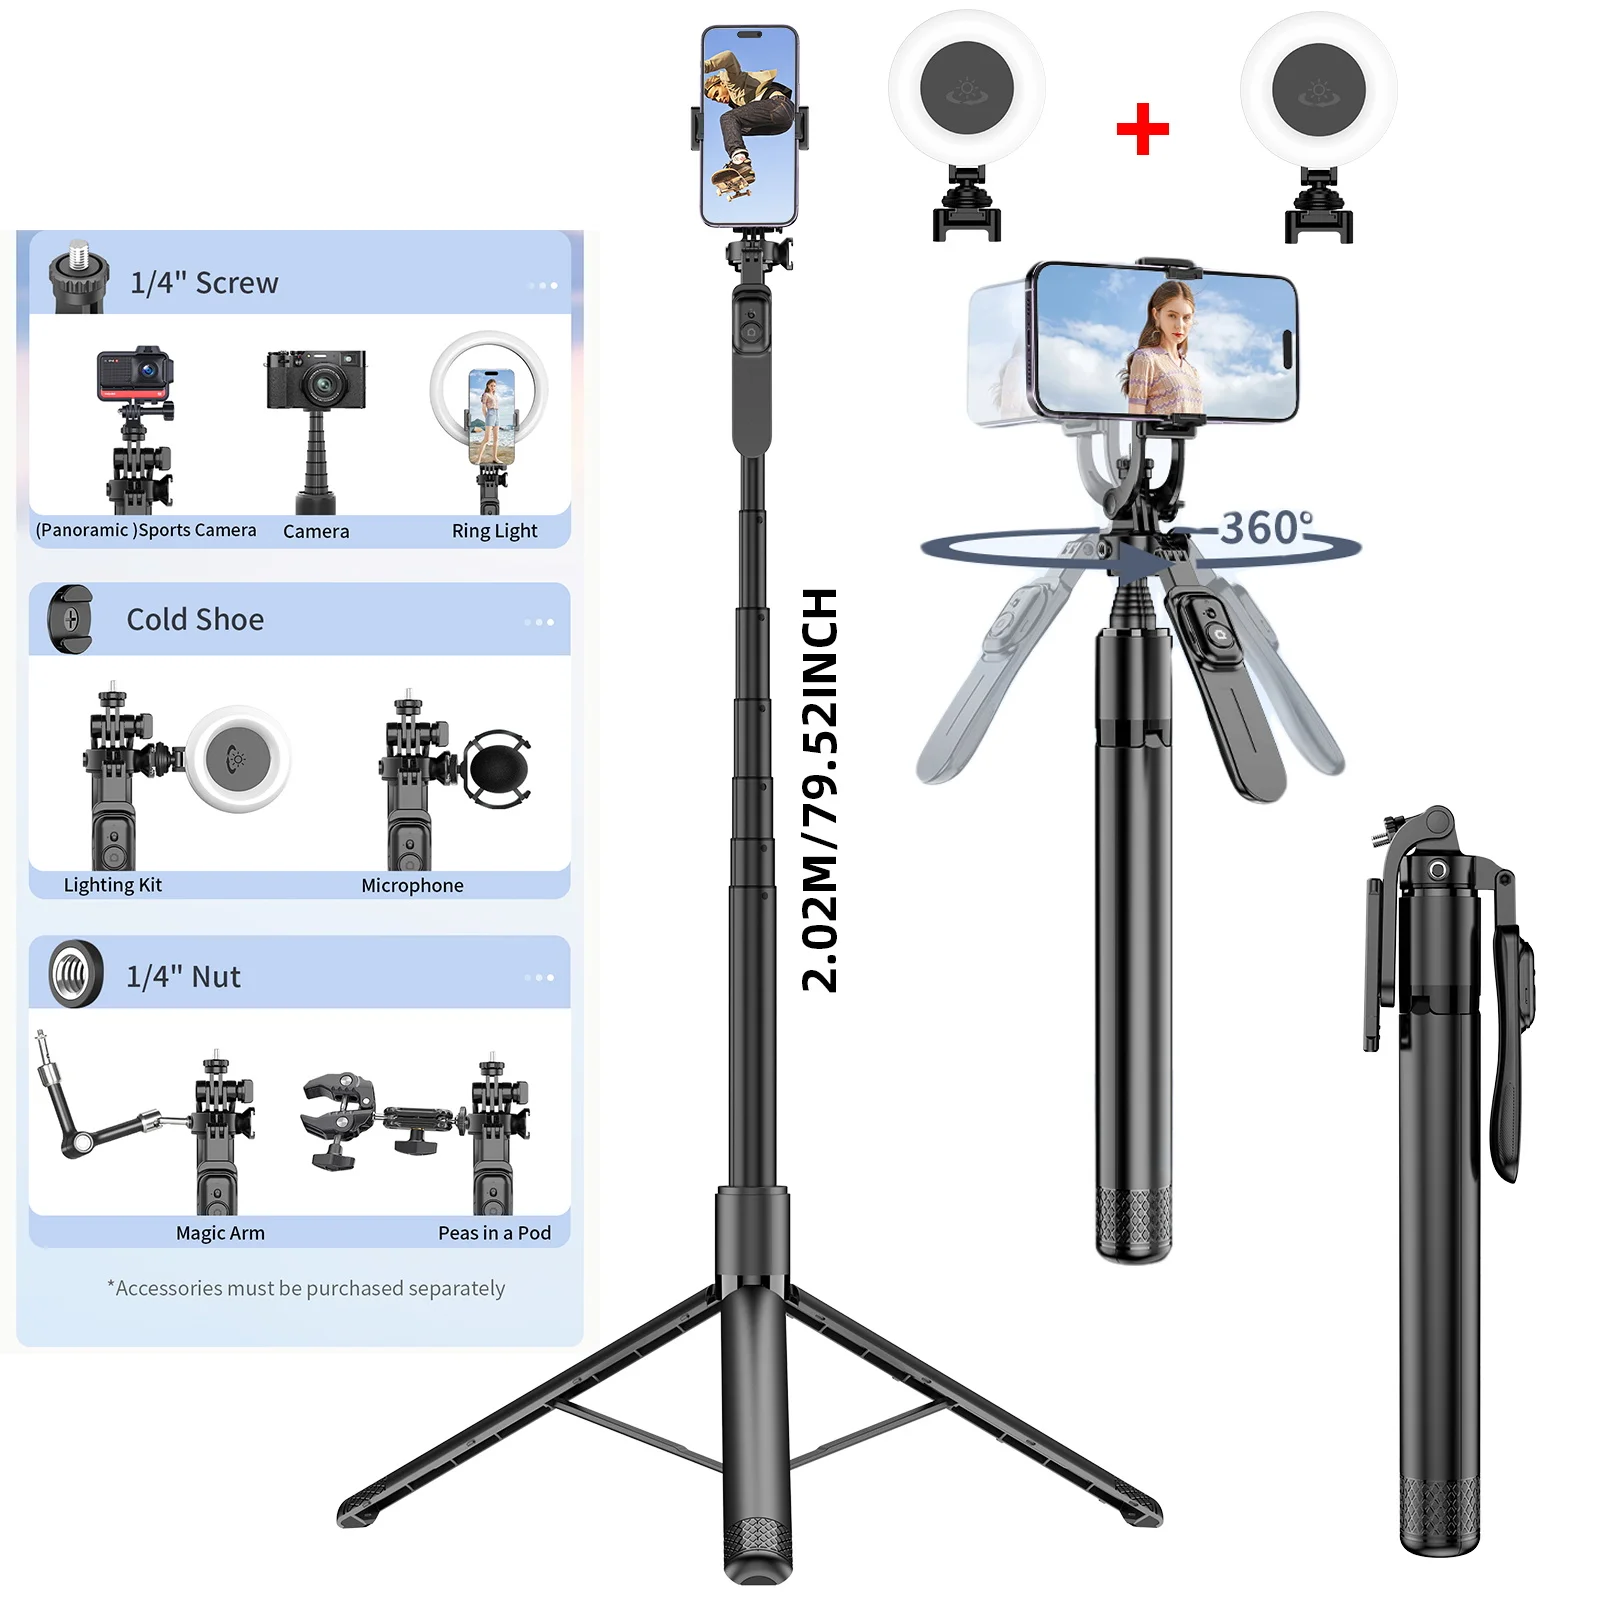 

2020mm Portable Tripod for Phone Camera Selfie Stick Tripod Stand Wireless Remote with 1/4 Screw 1/4 Nut Light for Camera Phone